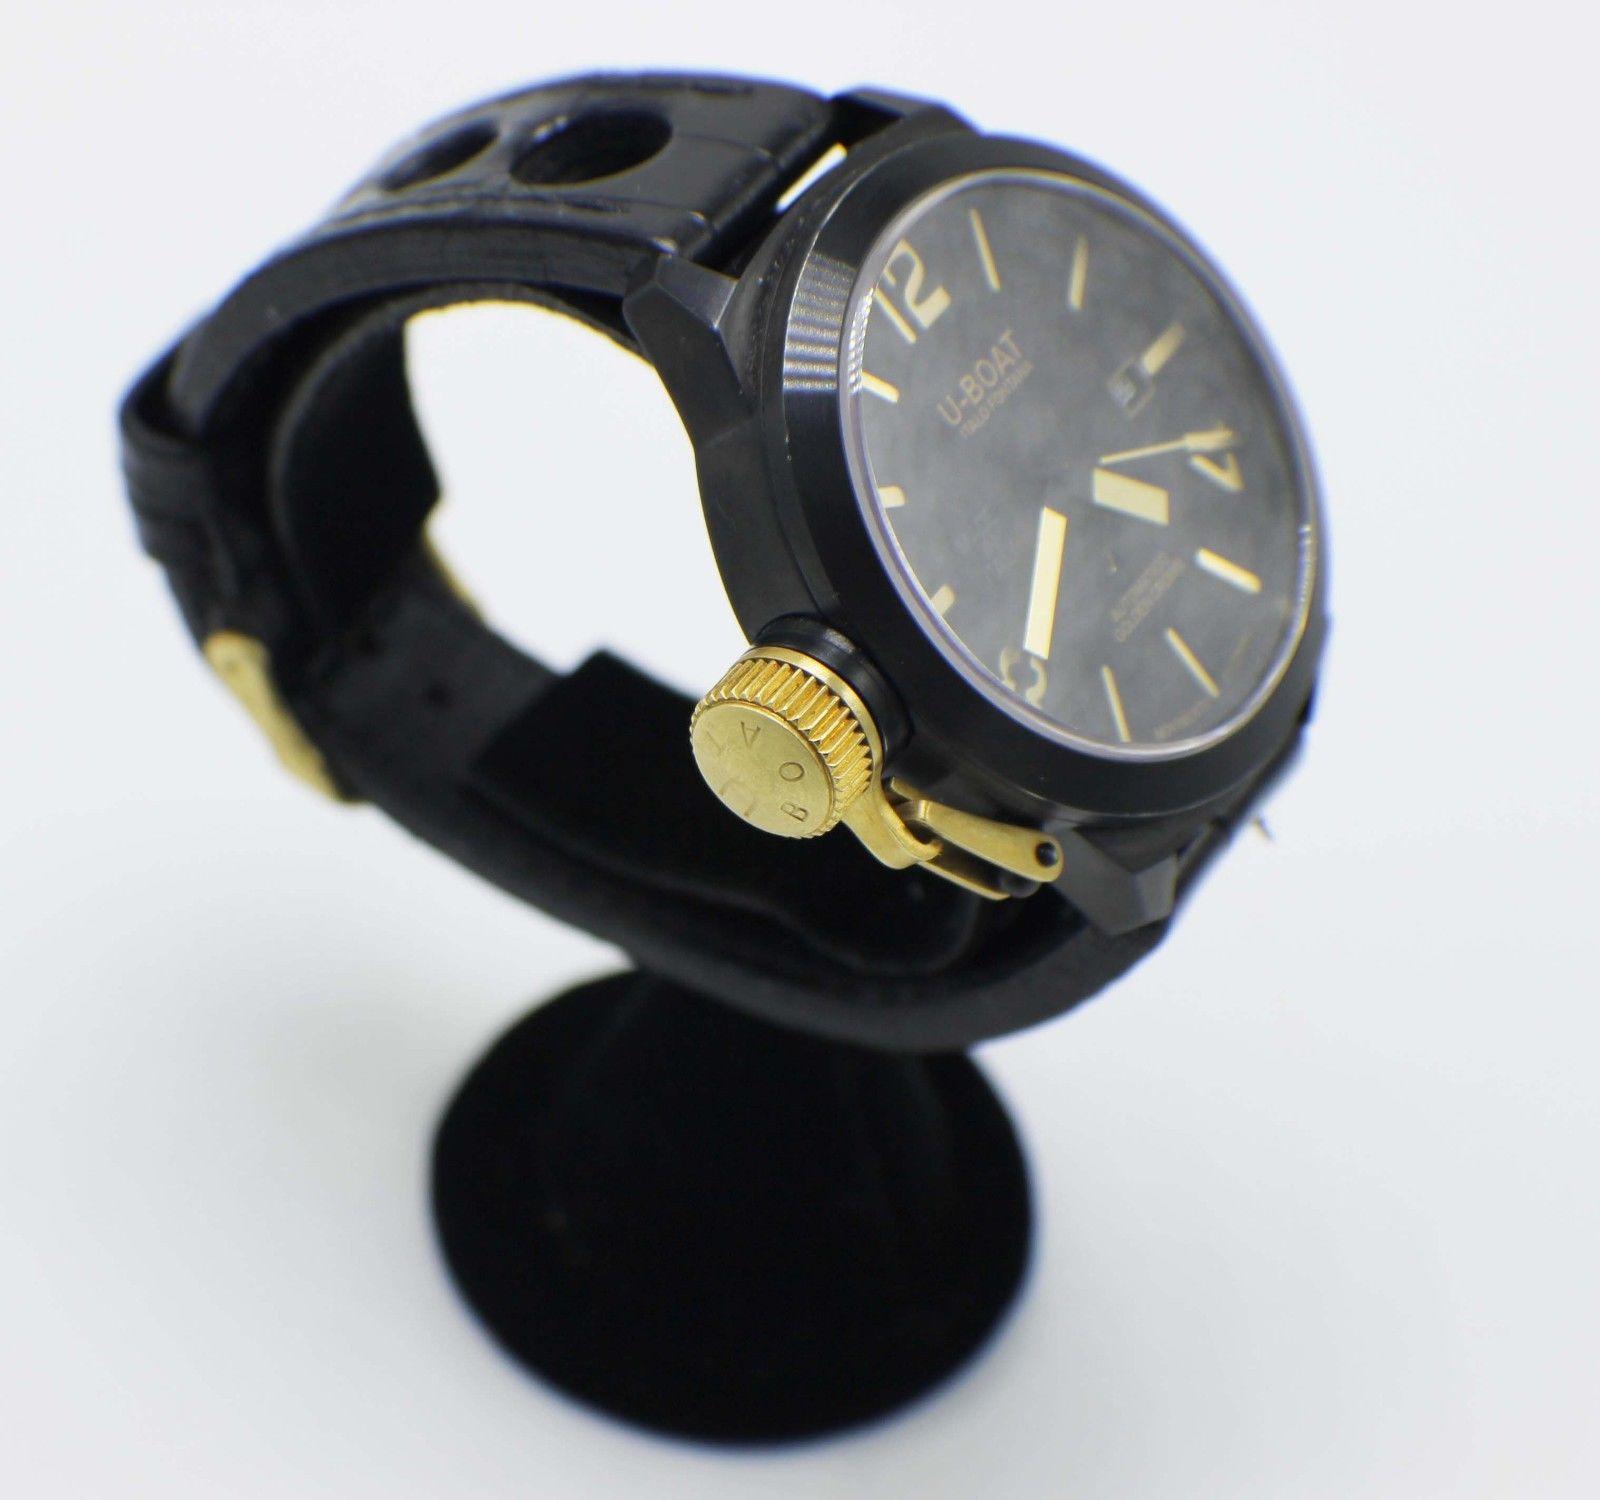 Model: Classico Golden Crown 

Case Material: Stainless Steel with Black PVD

Band: Leather 

Bezel: Stainless Steel Back PVD

Dial: Black 

Face: Sapphire Crystal 

Case Size: 45mm

Includes: 

-U-Boat Box & Papers

-Certified Appraisal 

-6 Month